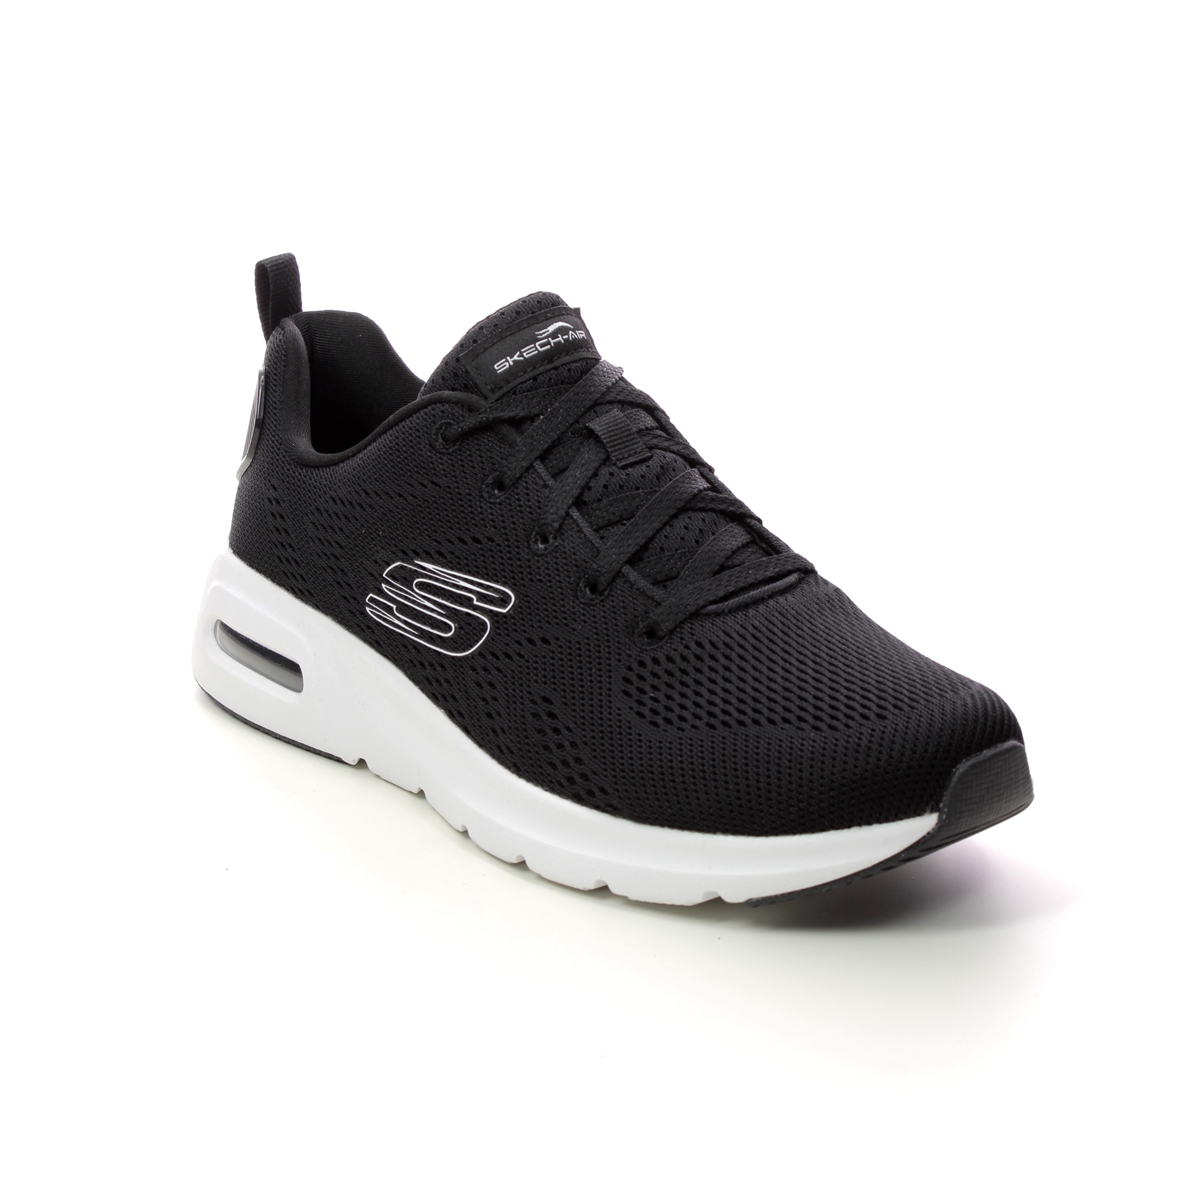 Skechers Skech Air Court Black White Womens Trainers 149948 In Size 5 In Plain Black White